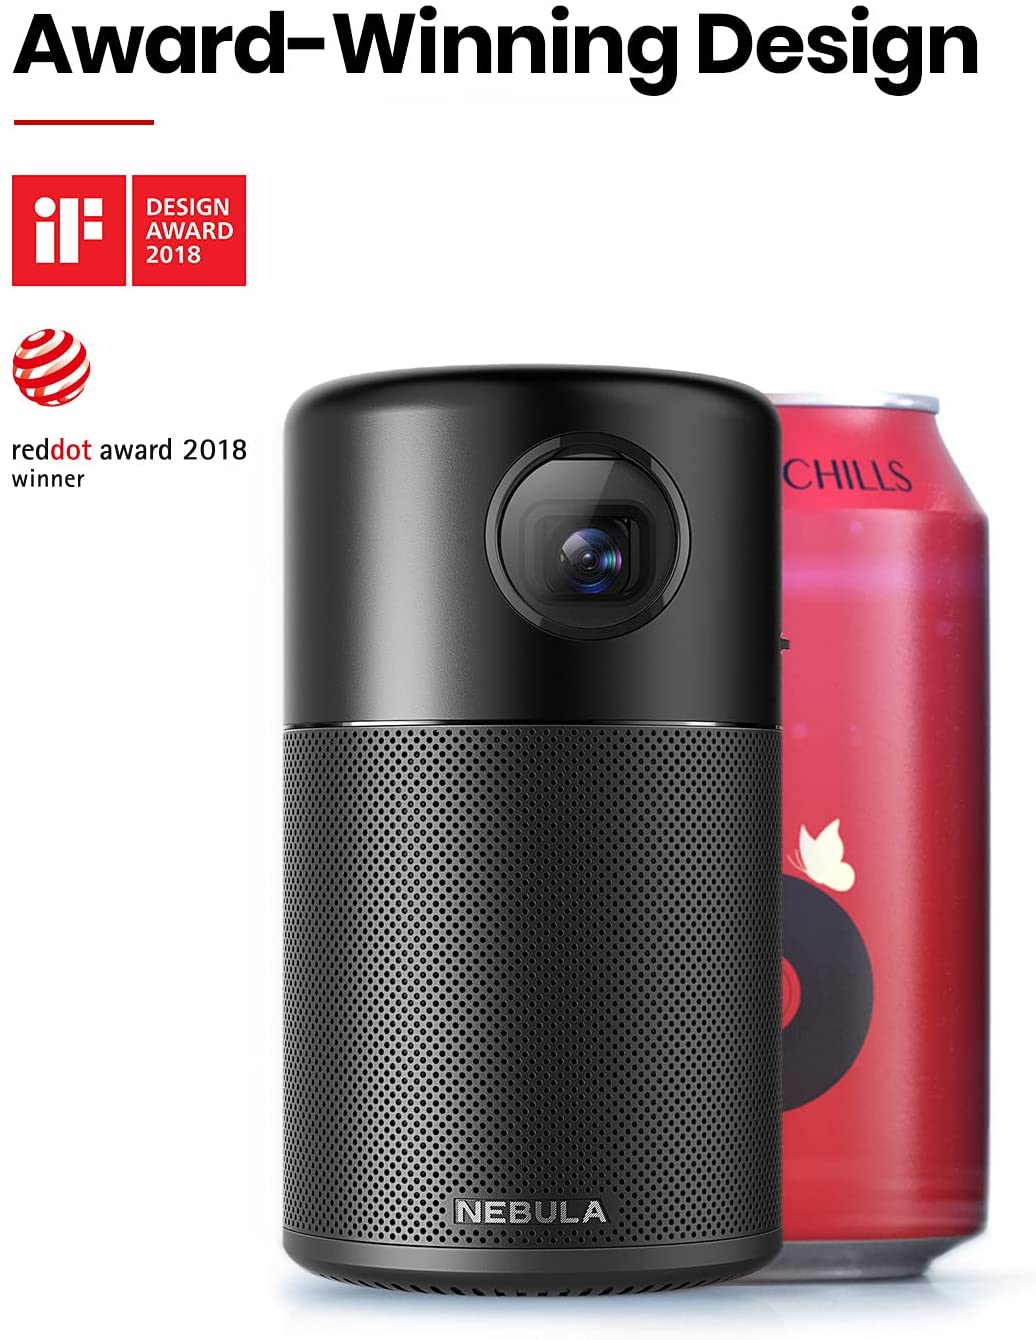 A Capsule portable projector sits in a white room next to a can of soda, while a graphic above shows a Reddot award logo.